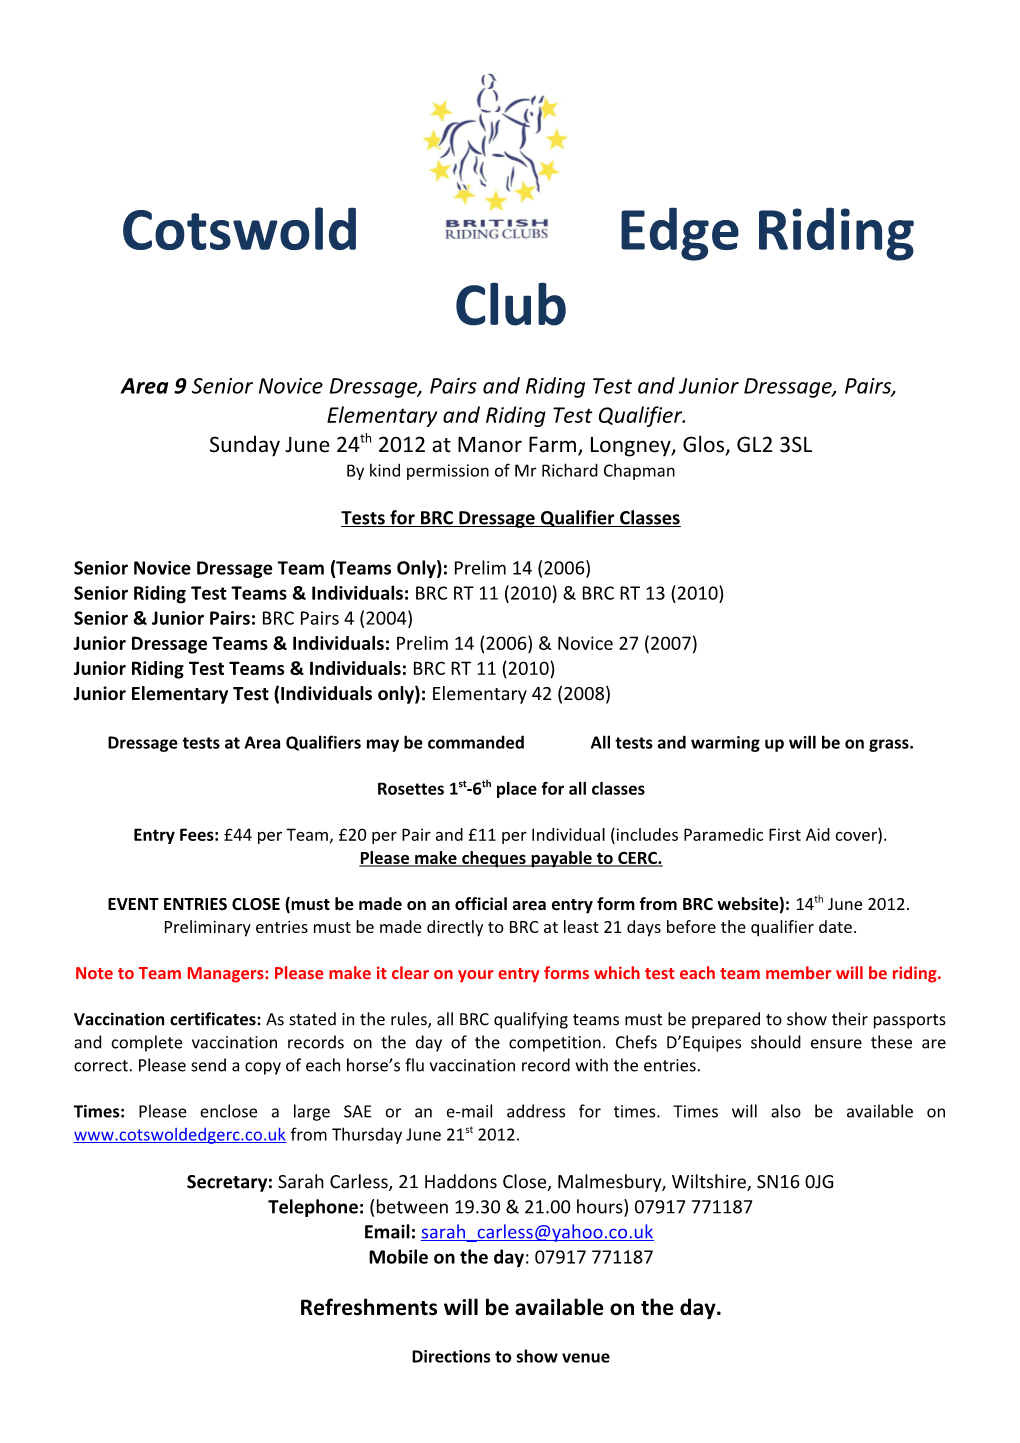 Cotswold Edge Riding Club